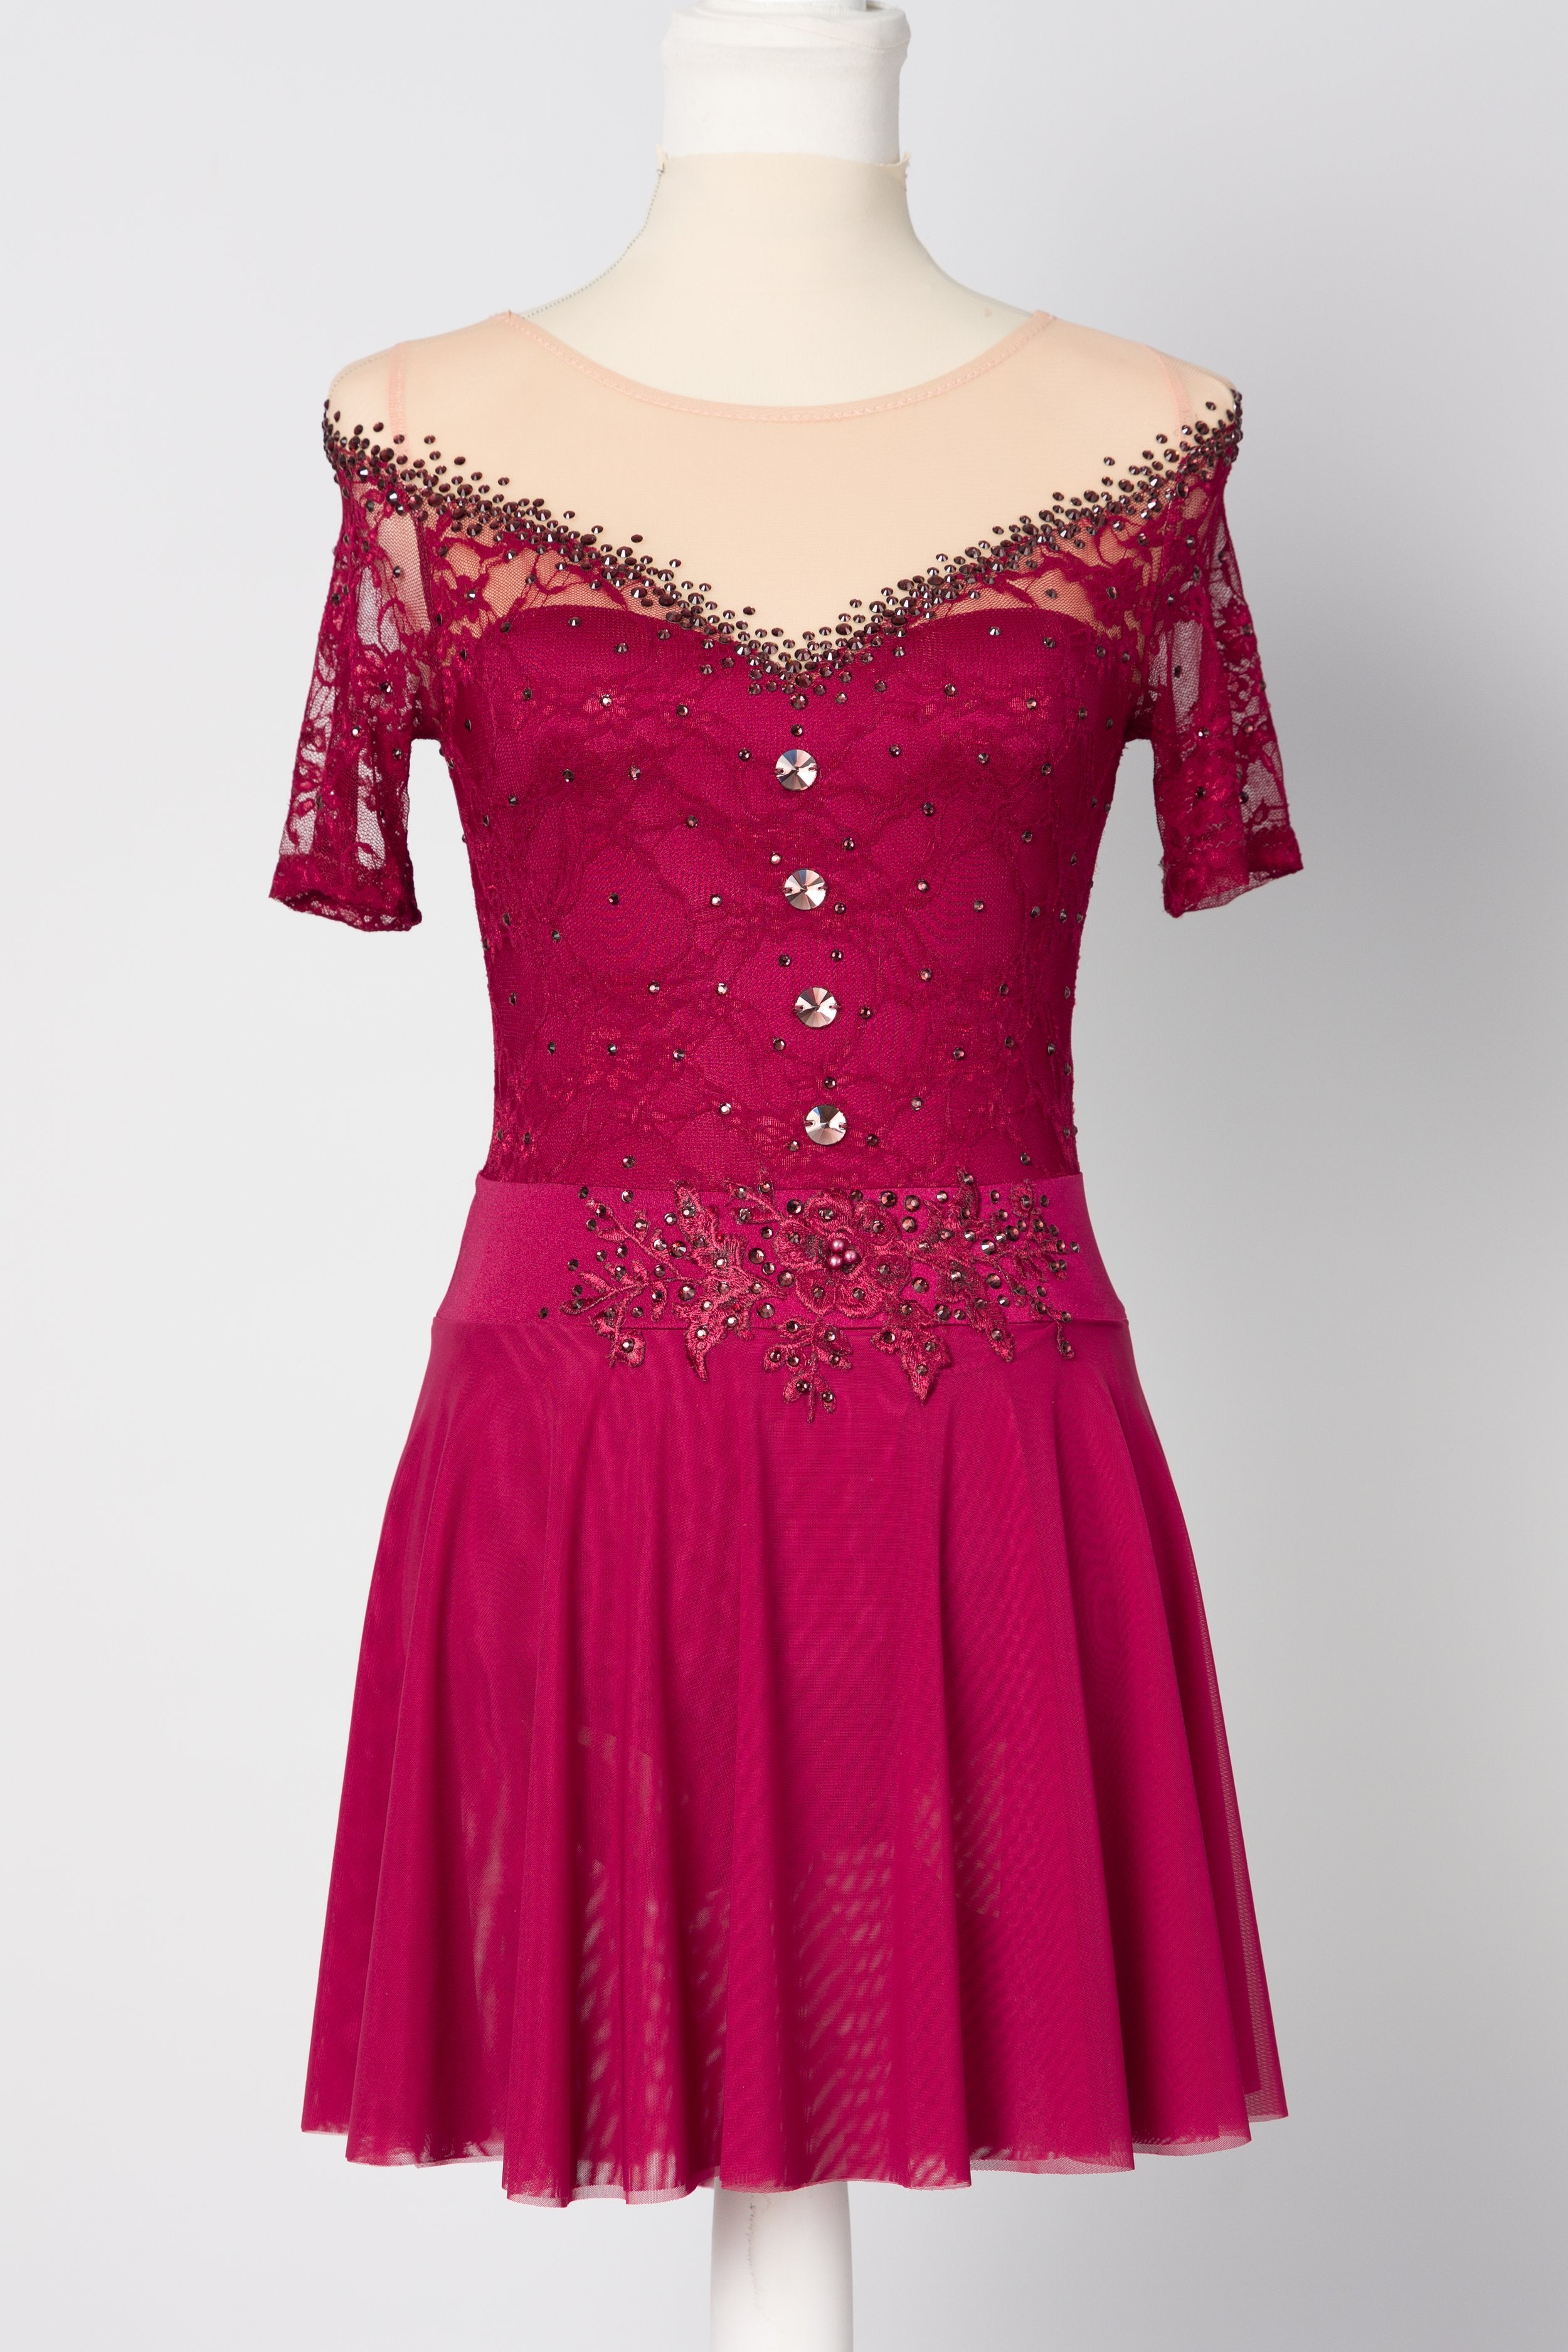 Raspberry 1940's dress with lace trim details and buttons down the front